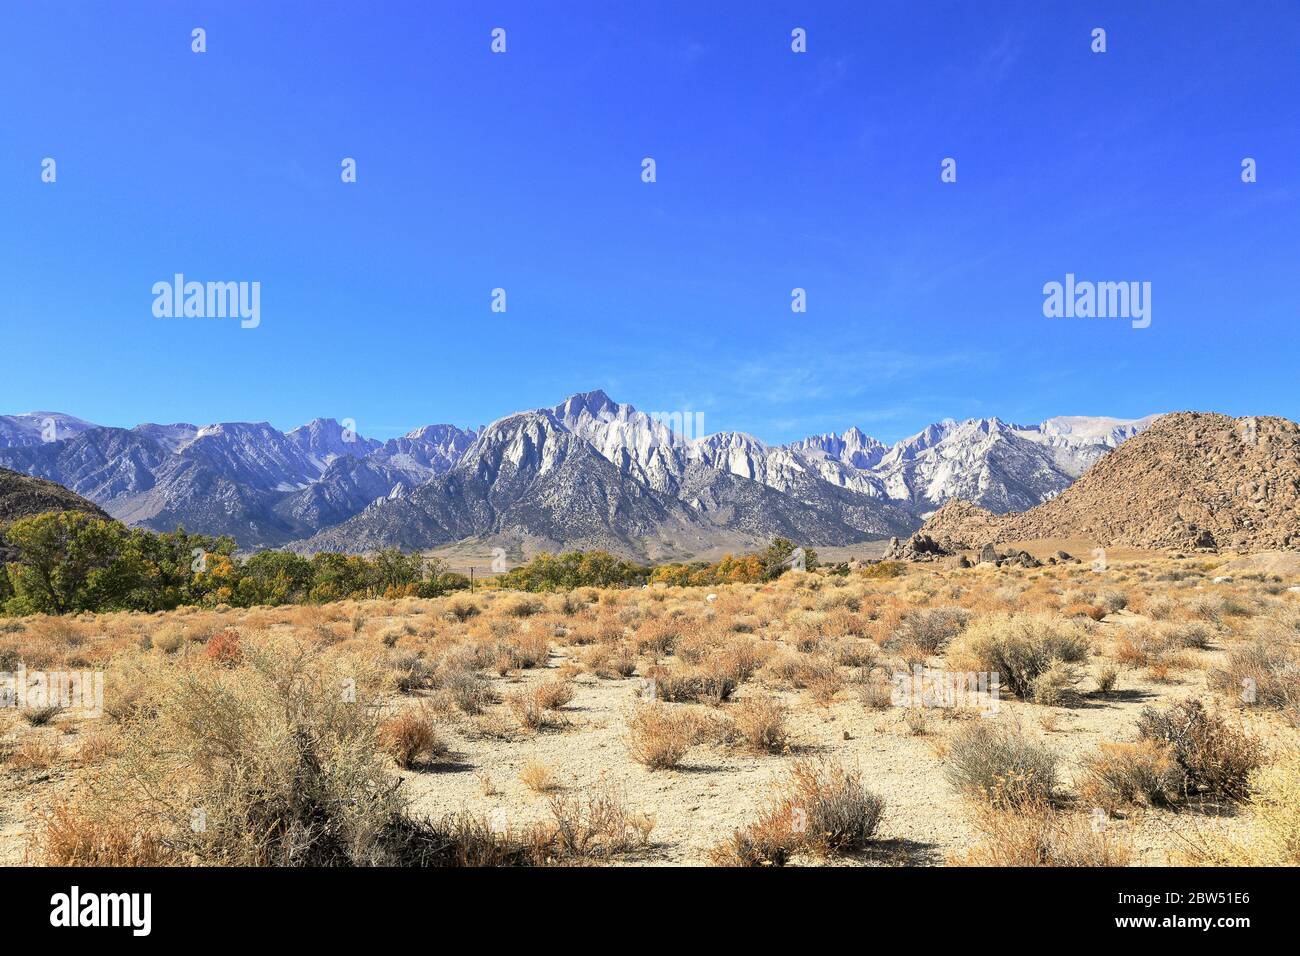 Alabama Hills with Sierra Nevada in the background in Lone Pine, California Stock Photo